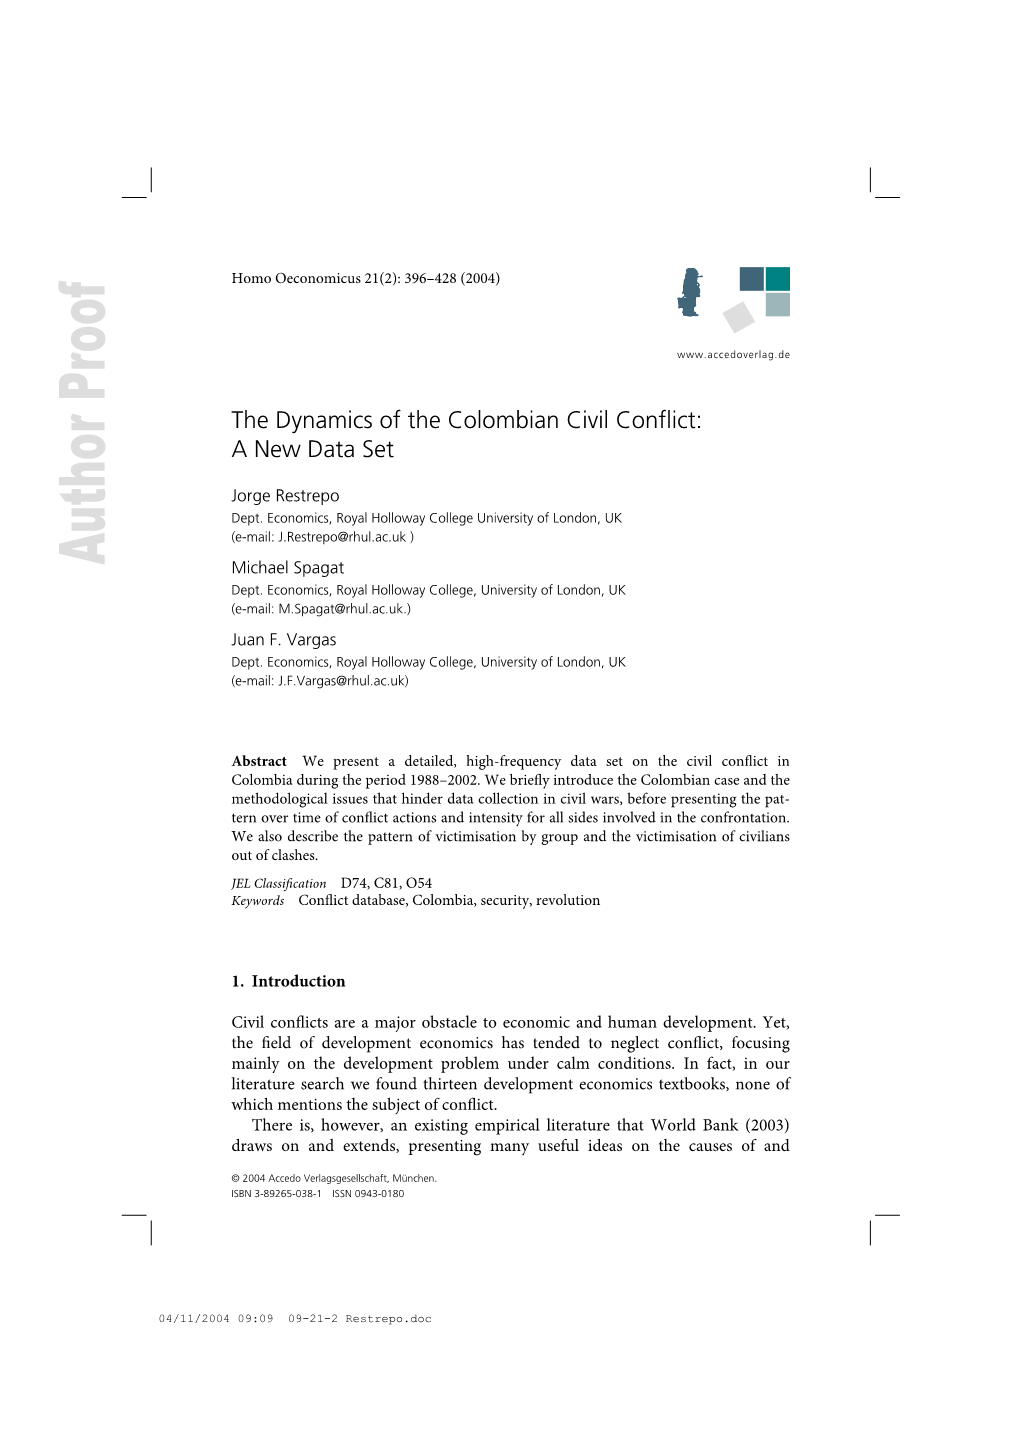 The Dynamics of the Colombian Civil Conflict: a New Data Set